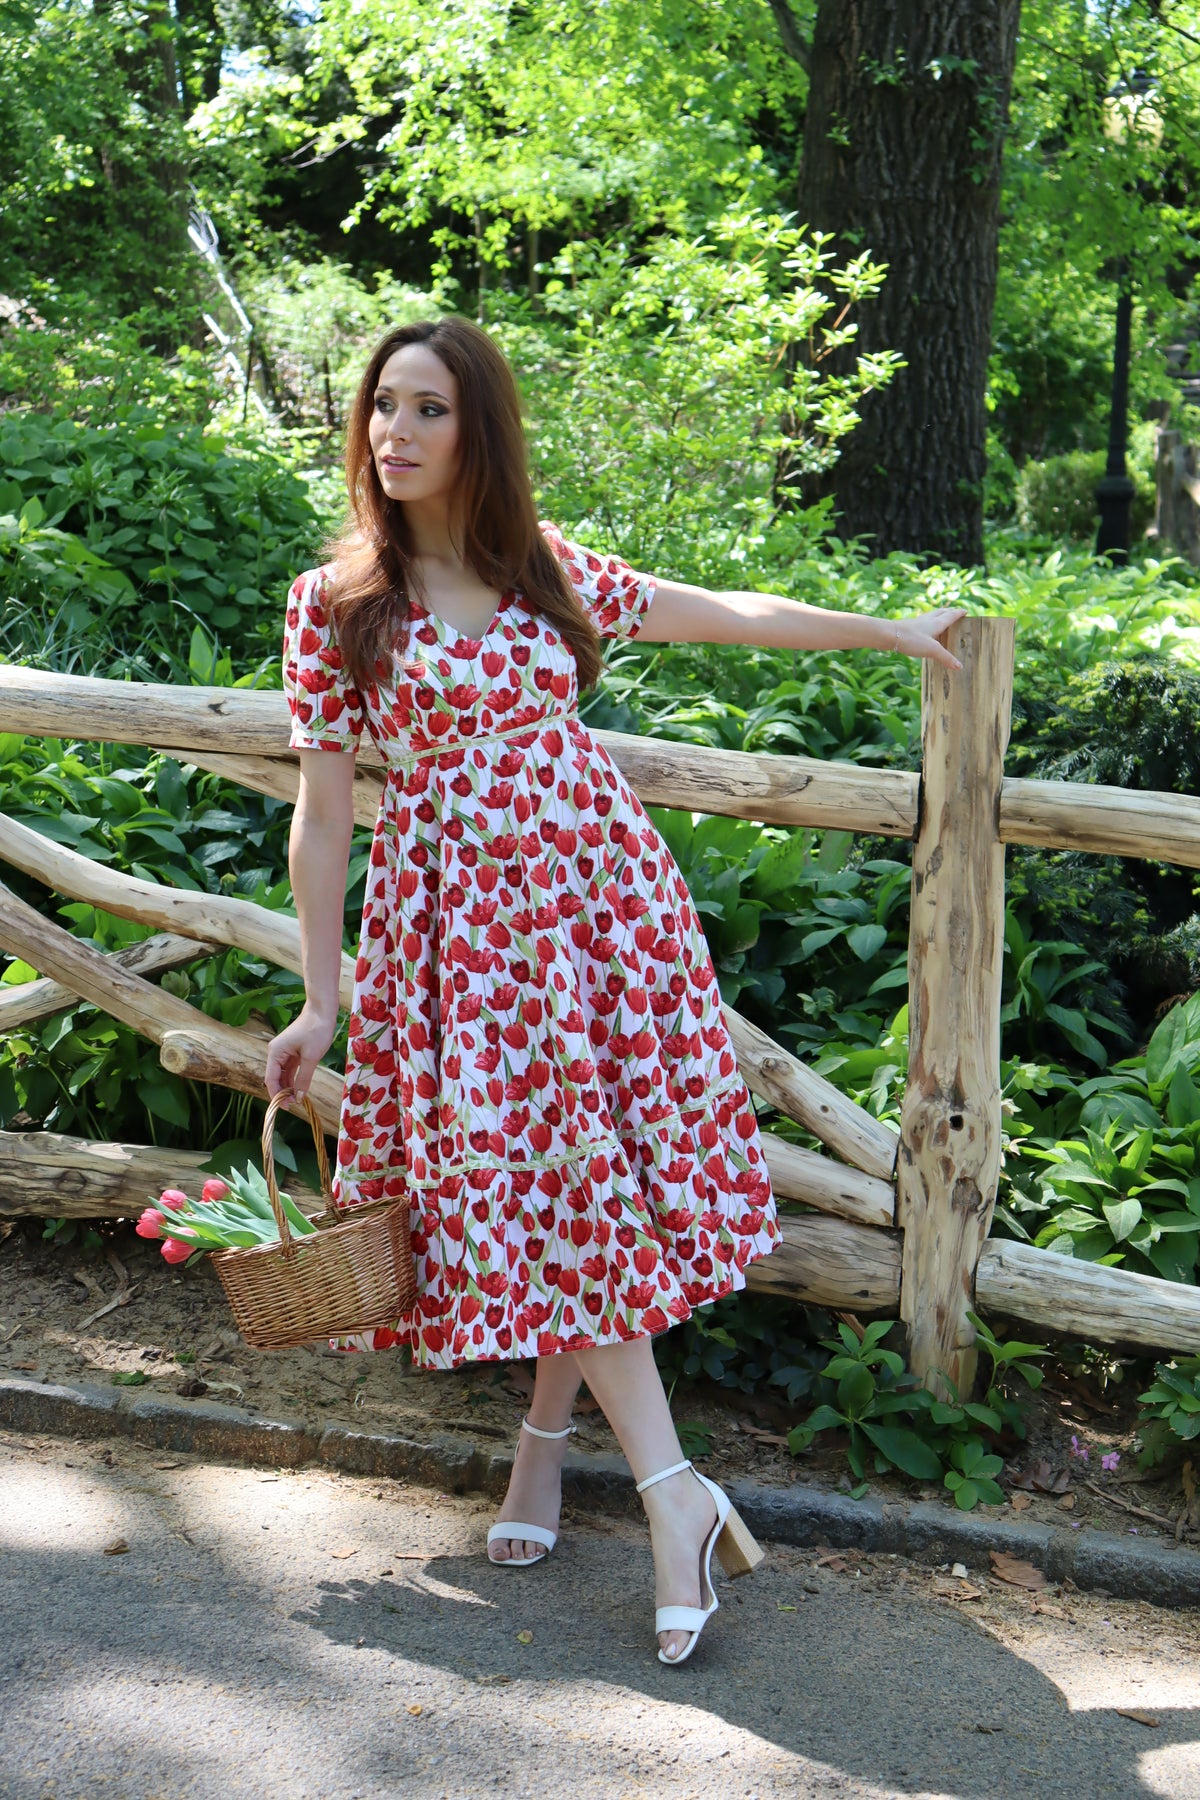 Model wearing midi length dress with a tulip print on white and holding a basket of tulips in front of a wood fence.